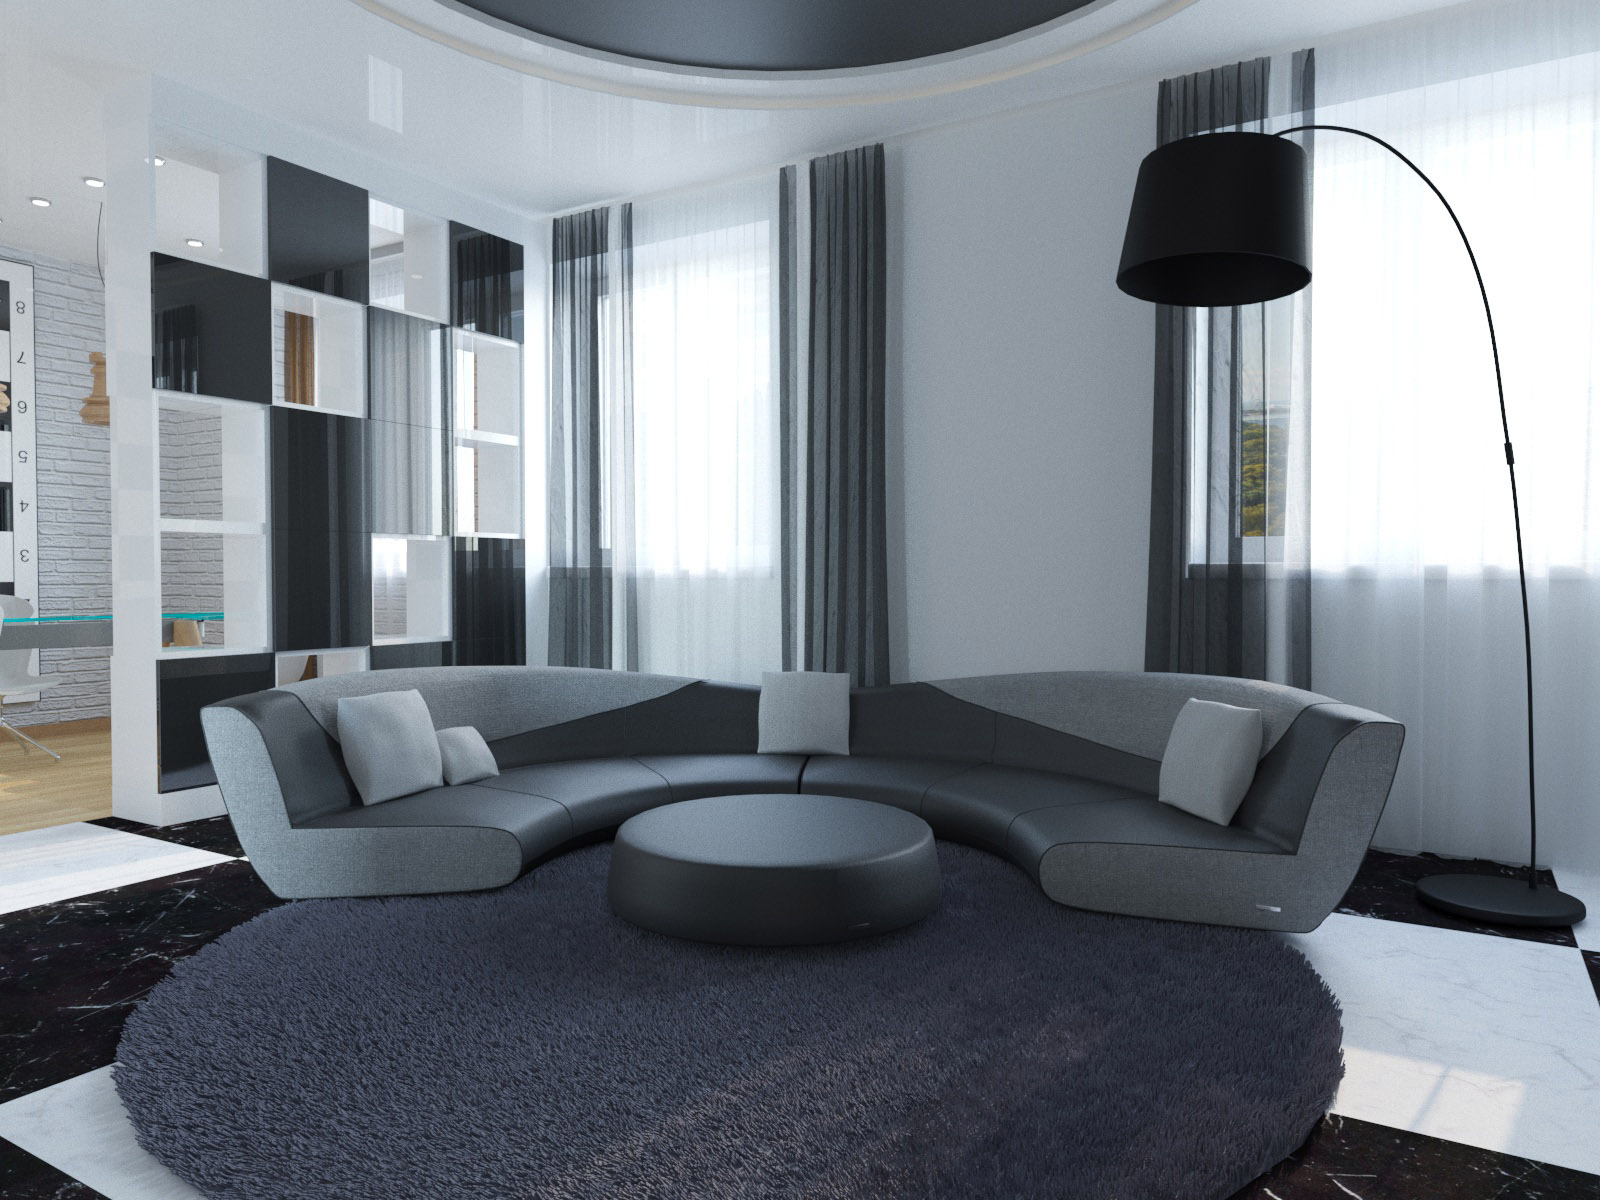 Design rooms in the hotel. in 3d max corona render image